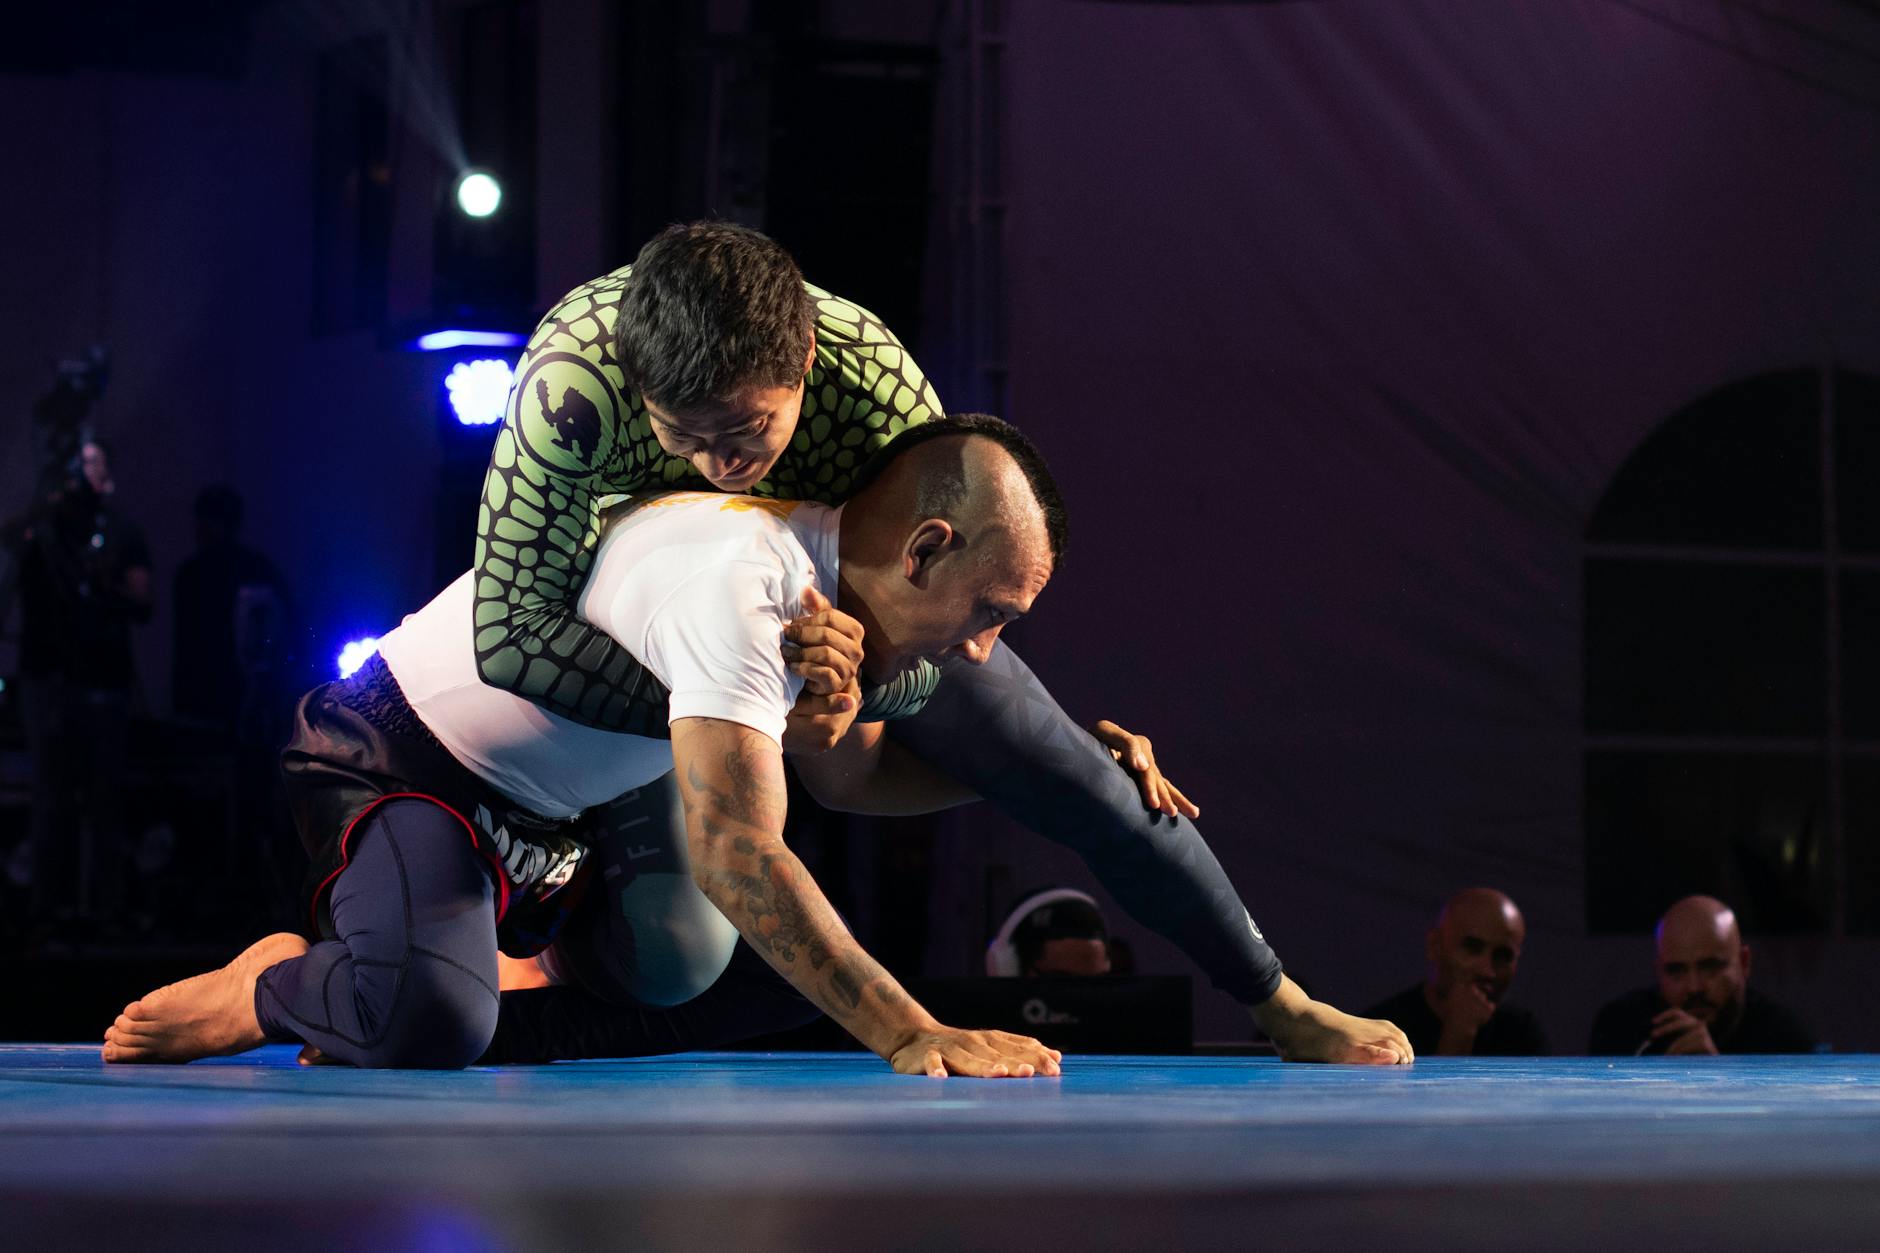 Two Men Wrestling on a Tatami